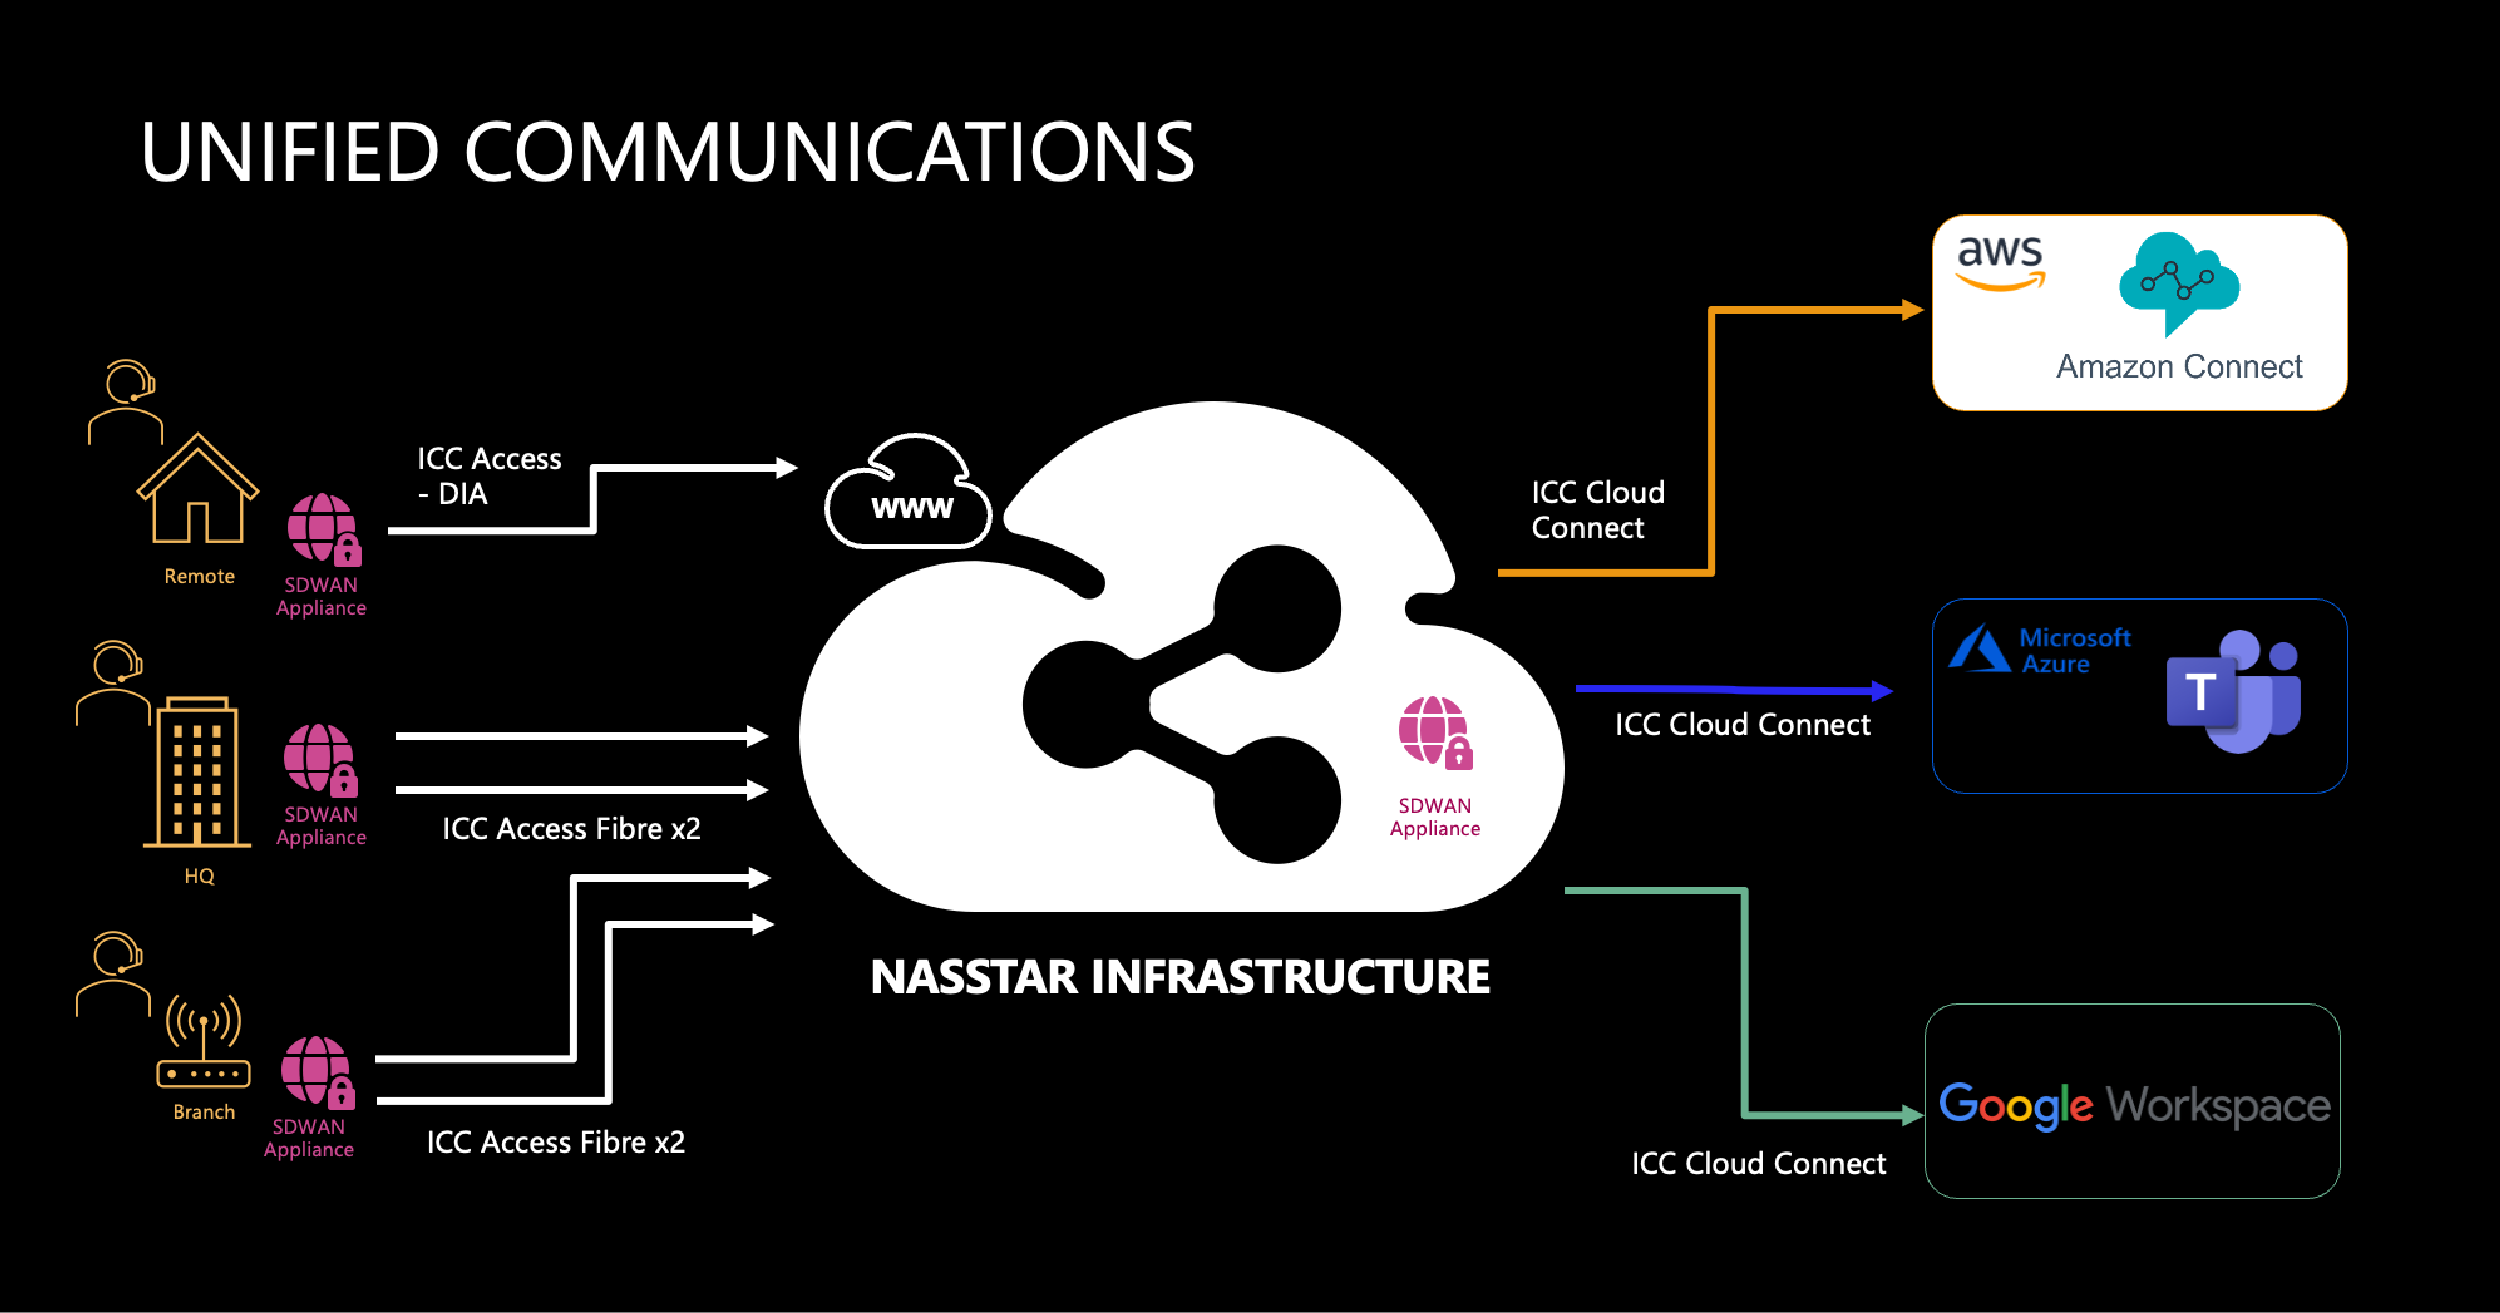 Unified Communications at Nasstar diagram